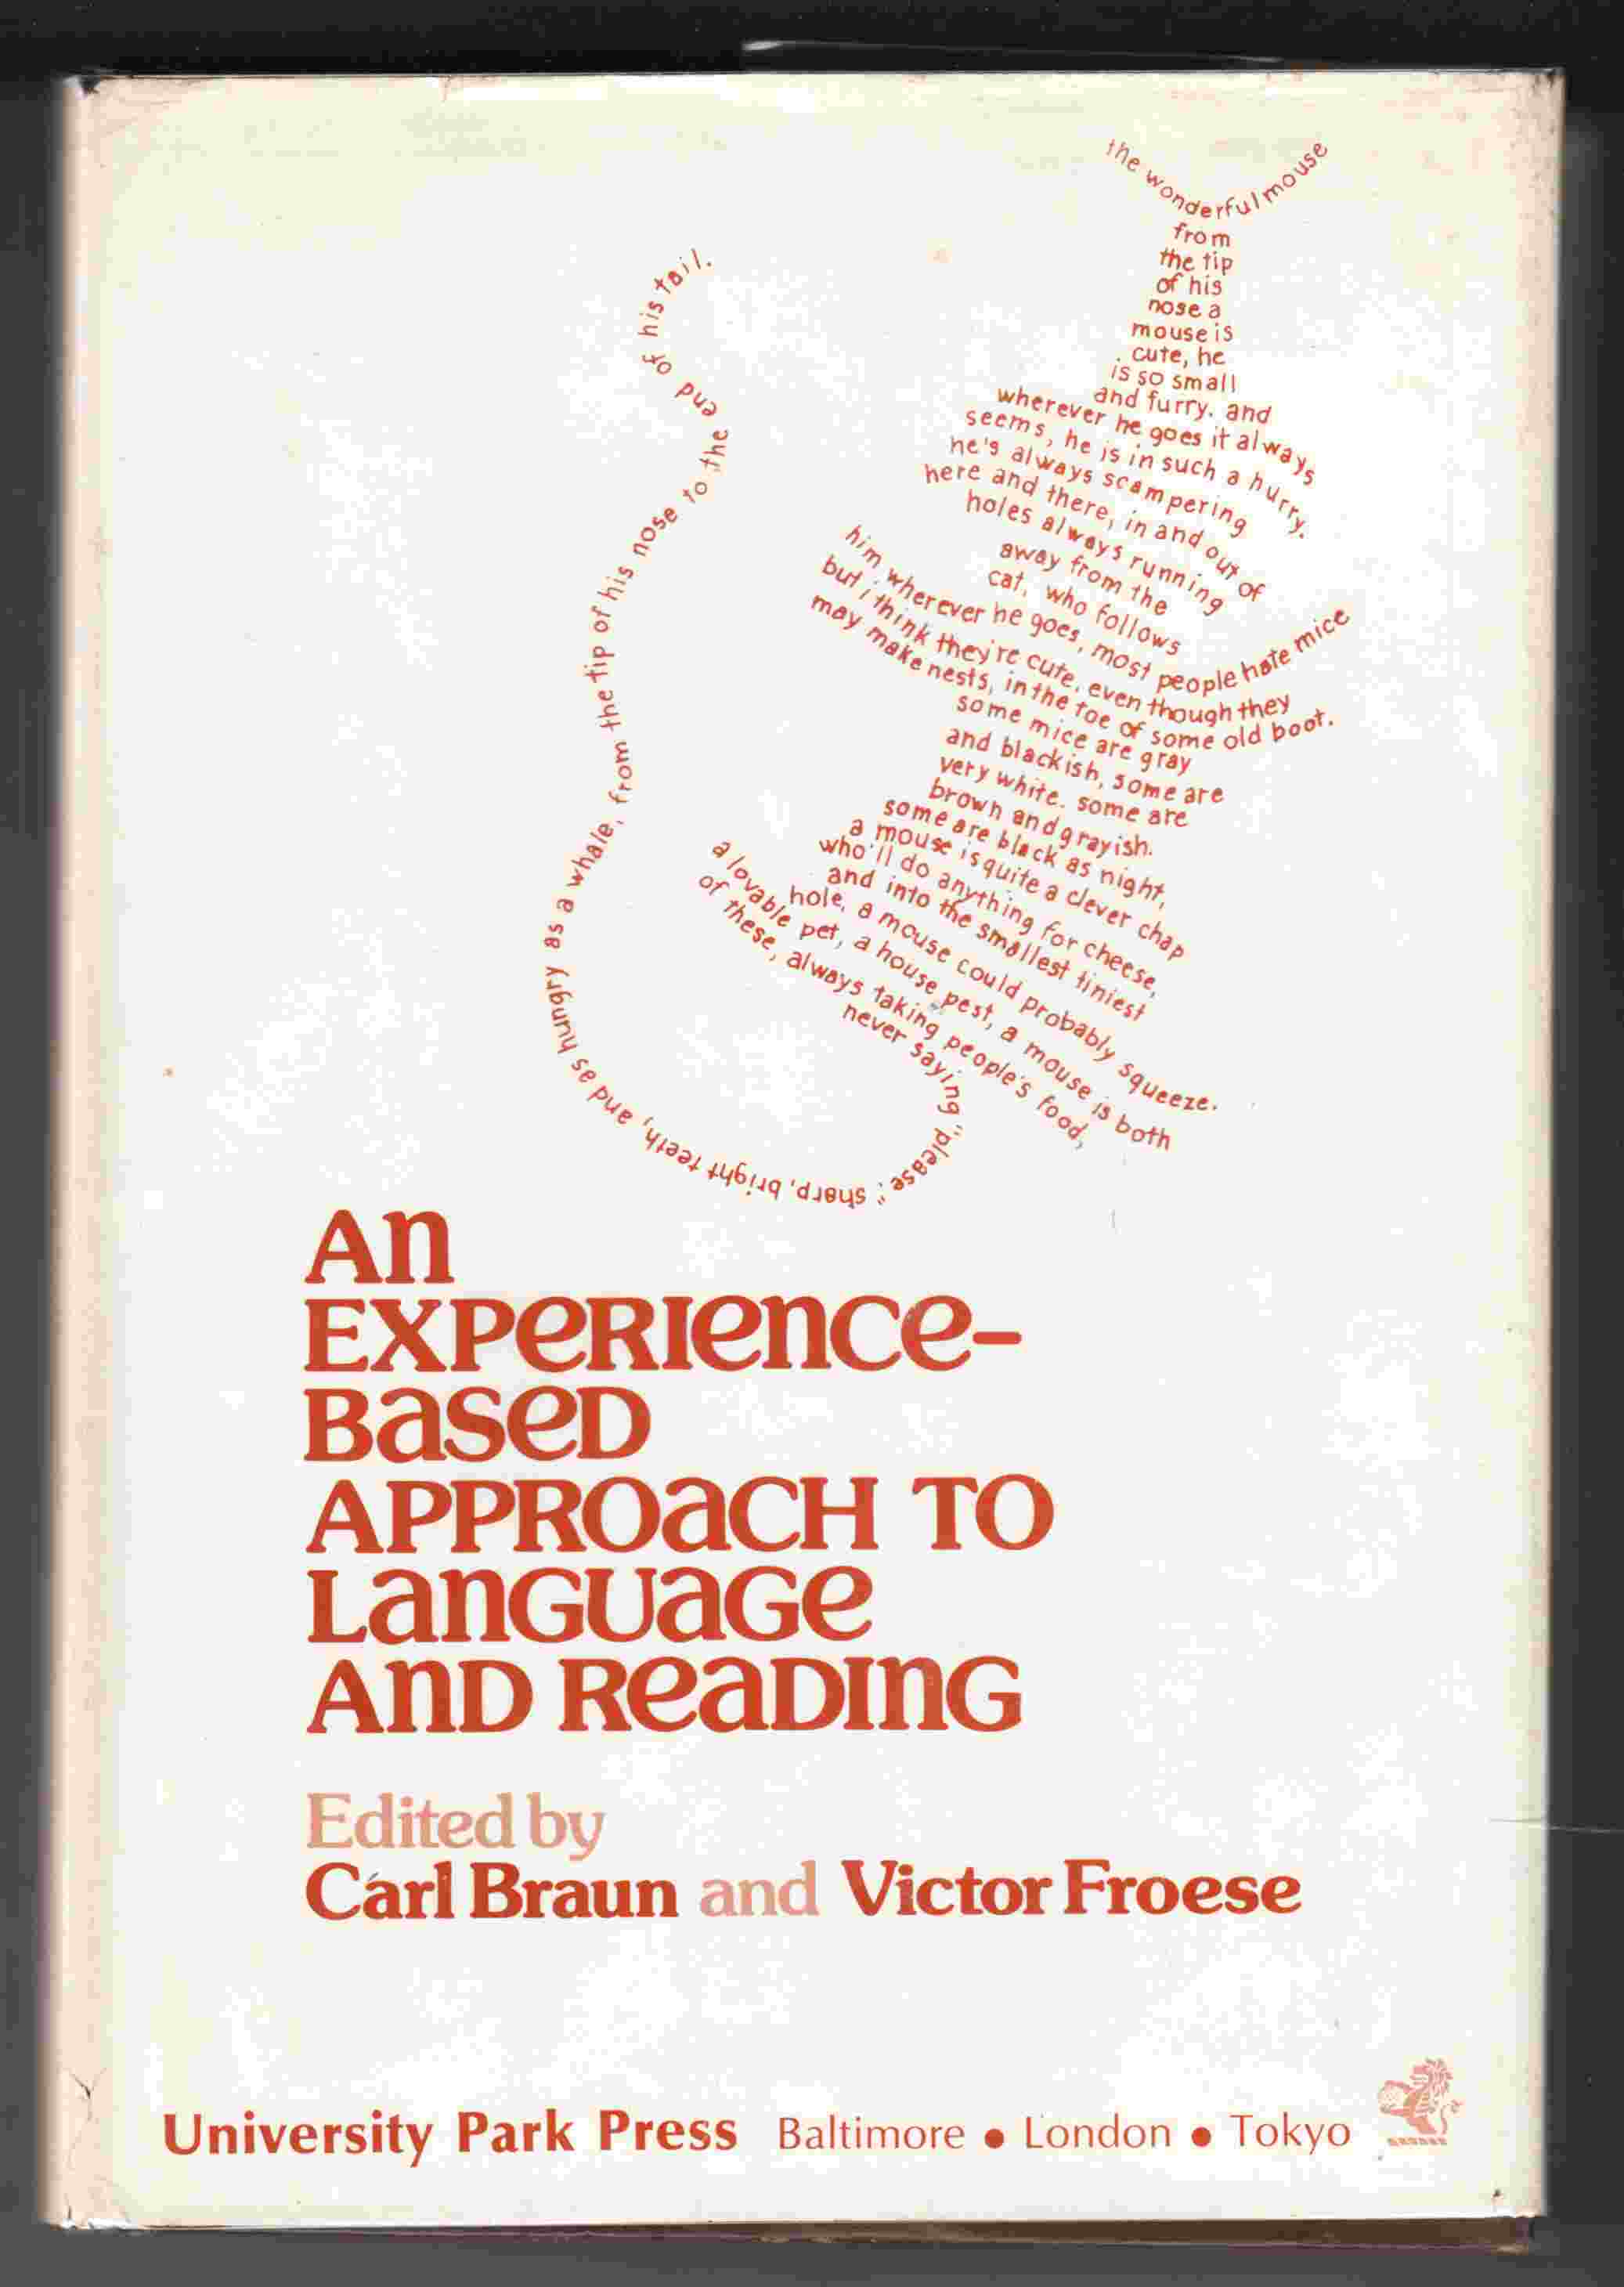 Whole-Language Practice and Theory